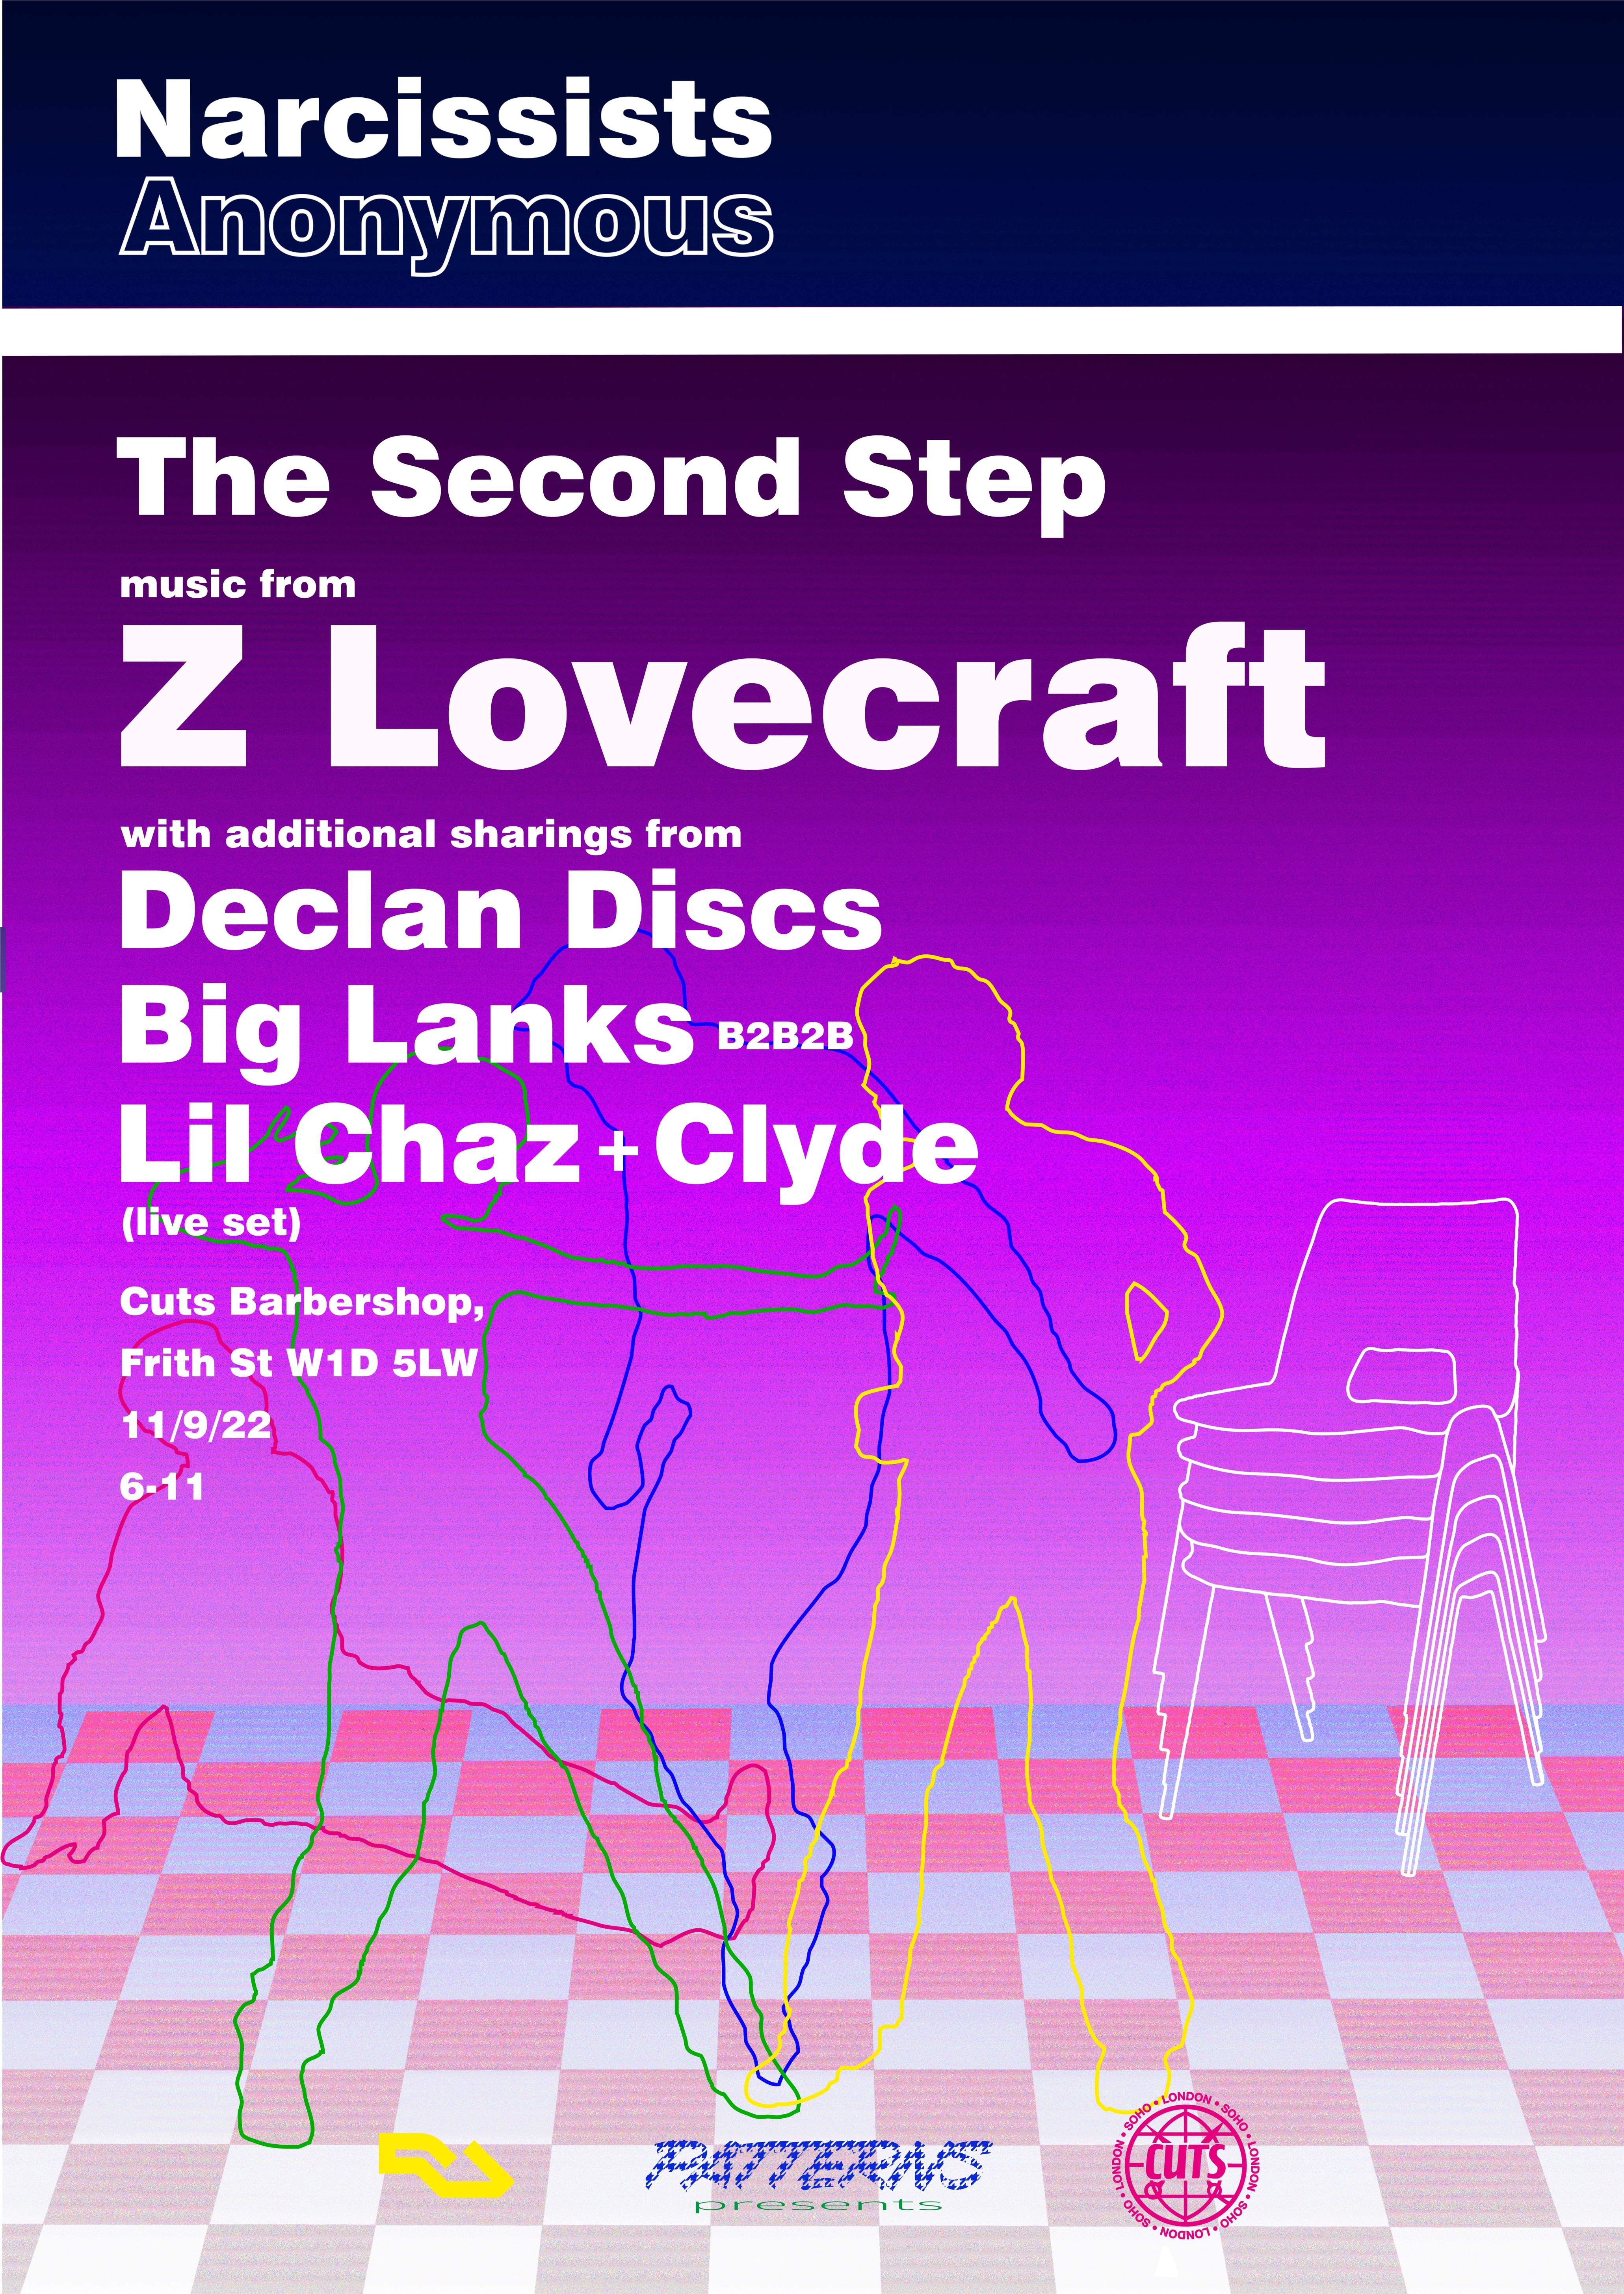 PATTERNS PRESENTS Narcissists Anonymous: The Second Step with Z Lovecraft  - フライヤー表